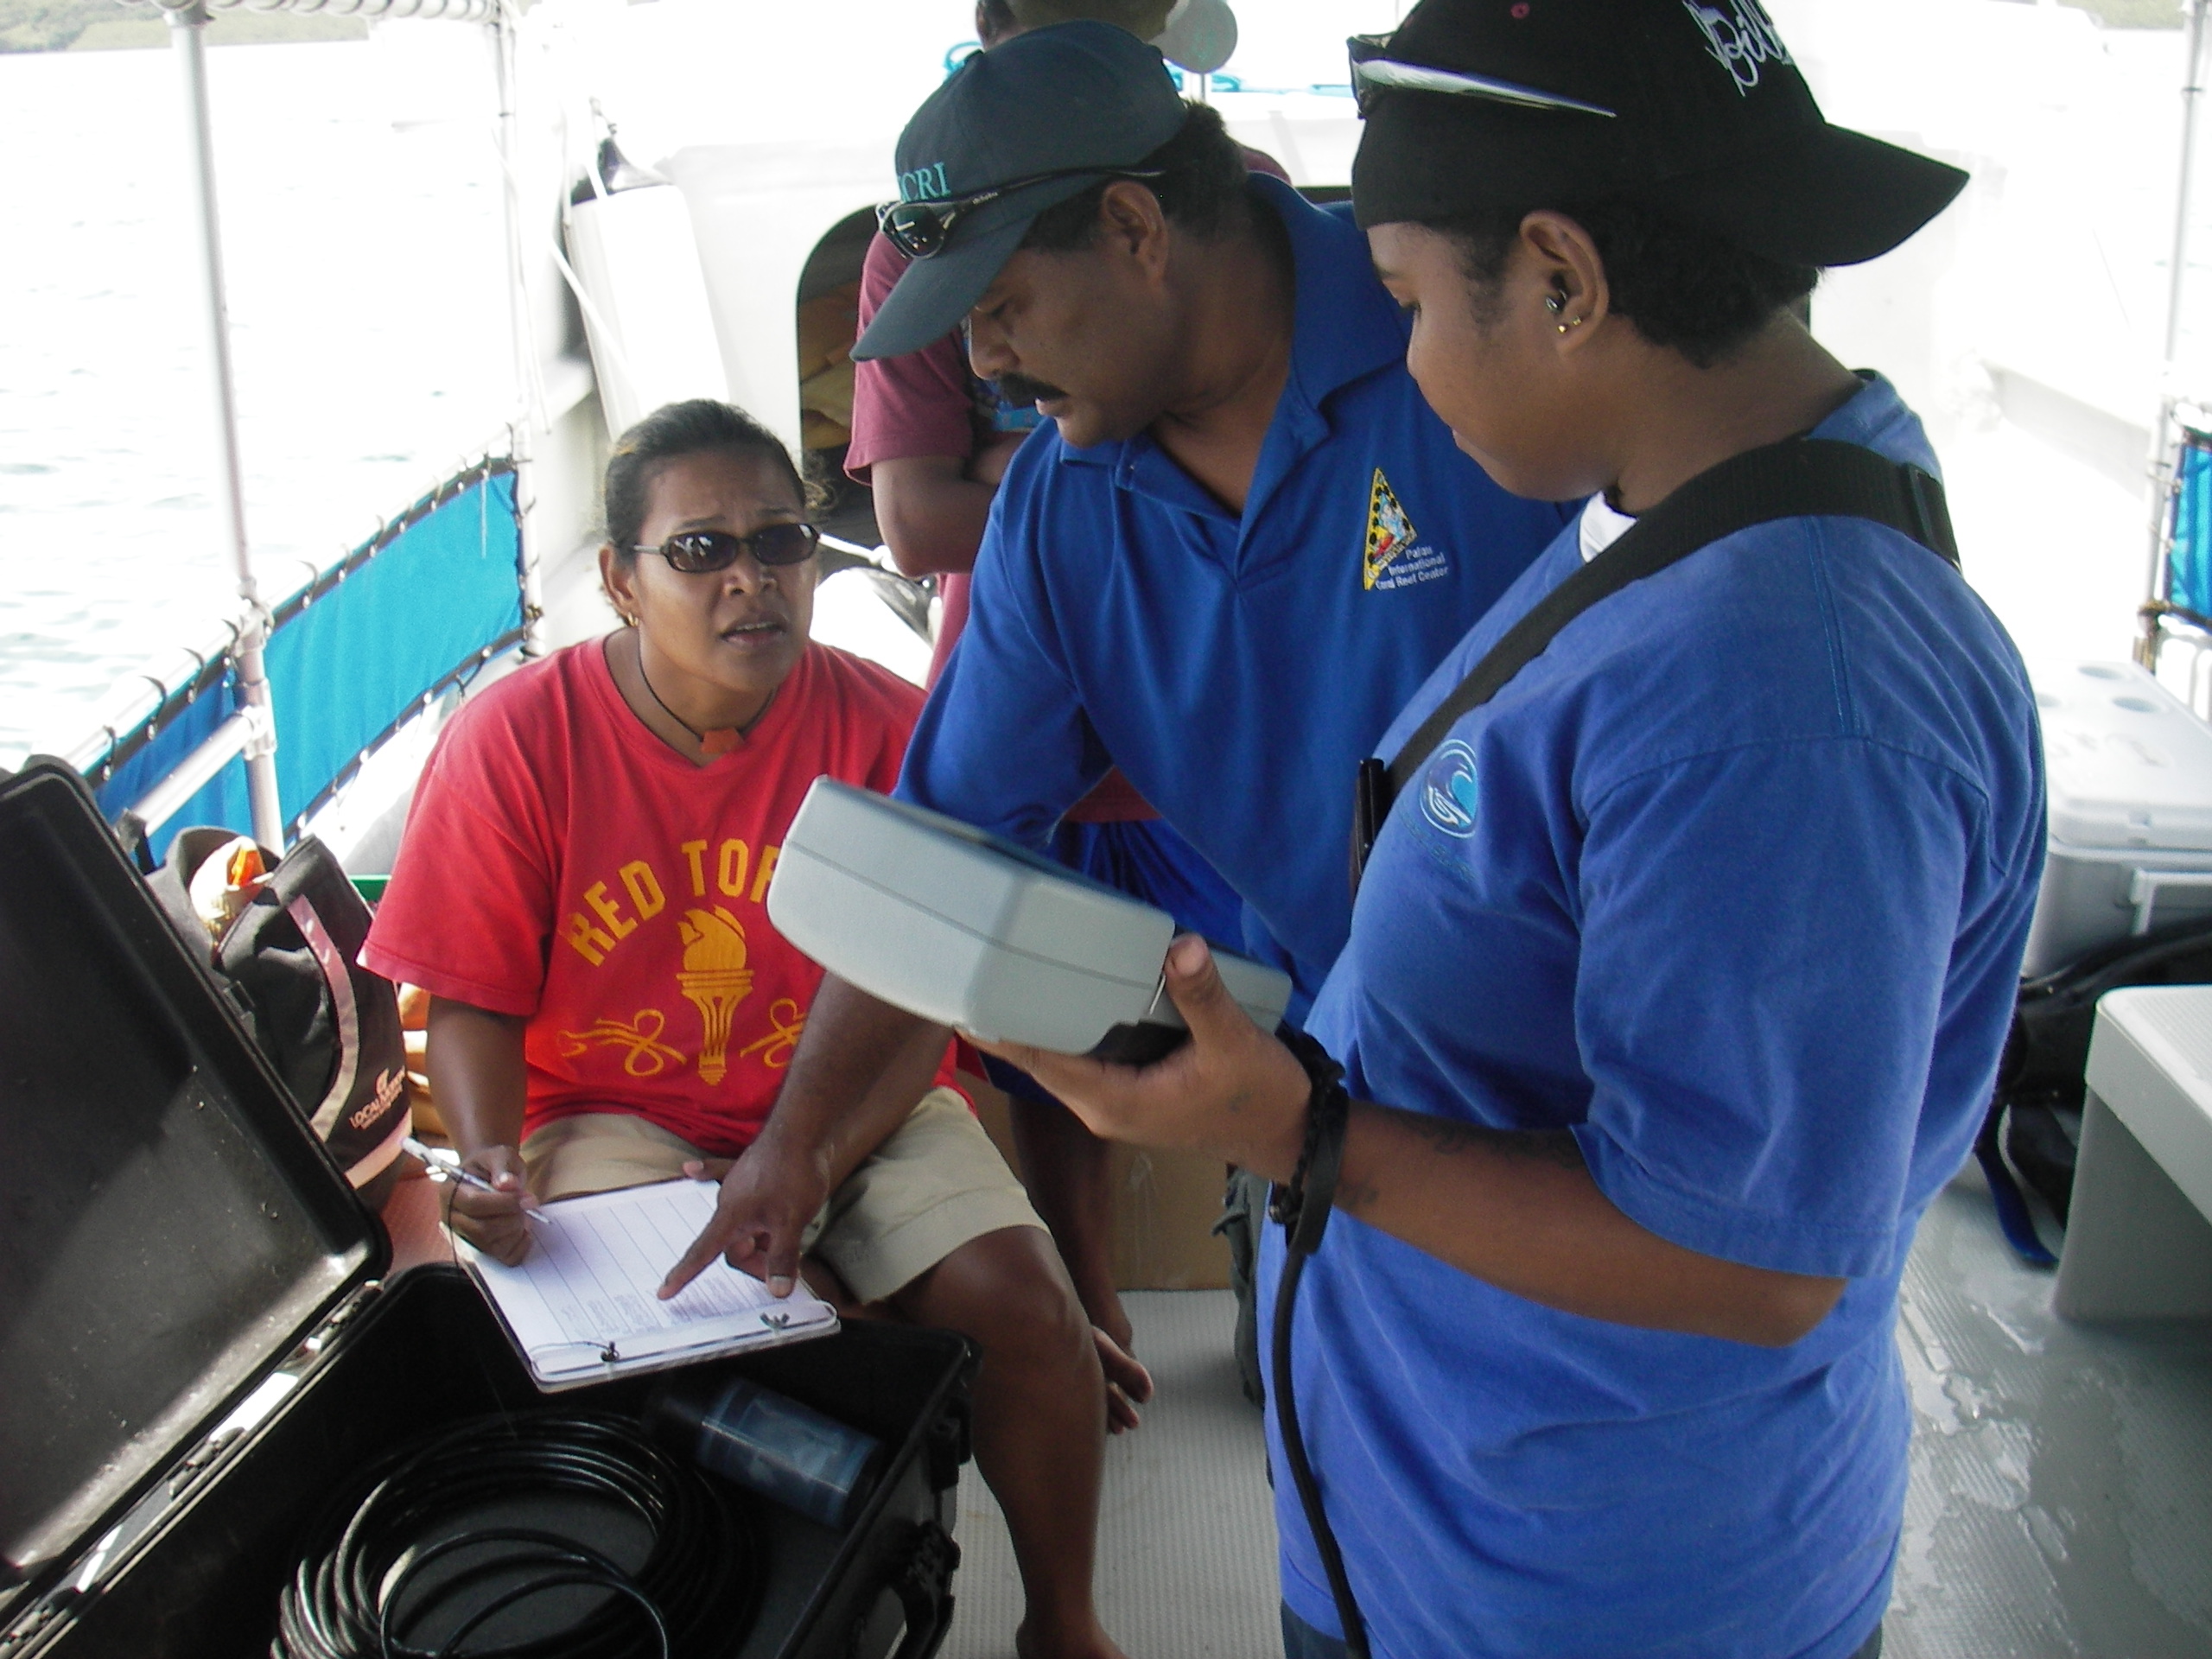 PCC Marine Science Student Discusses Results On The YSI Sonde With His Instructors.